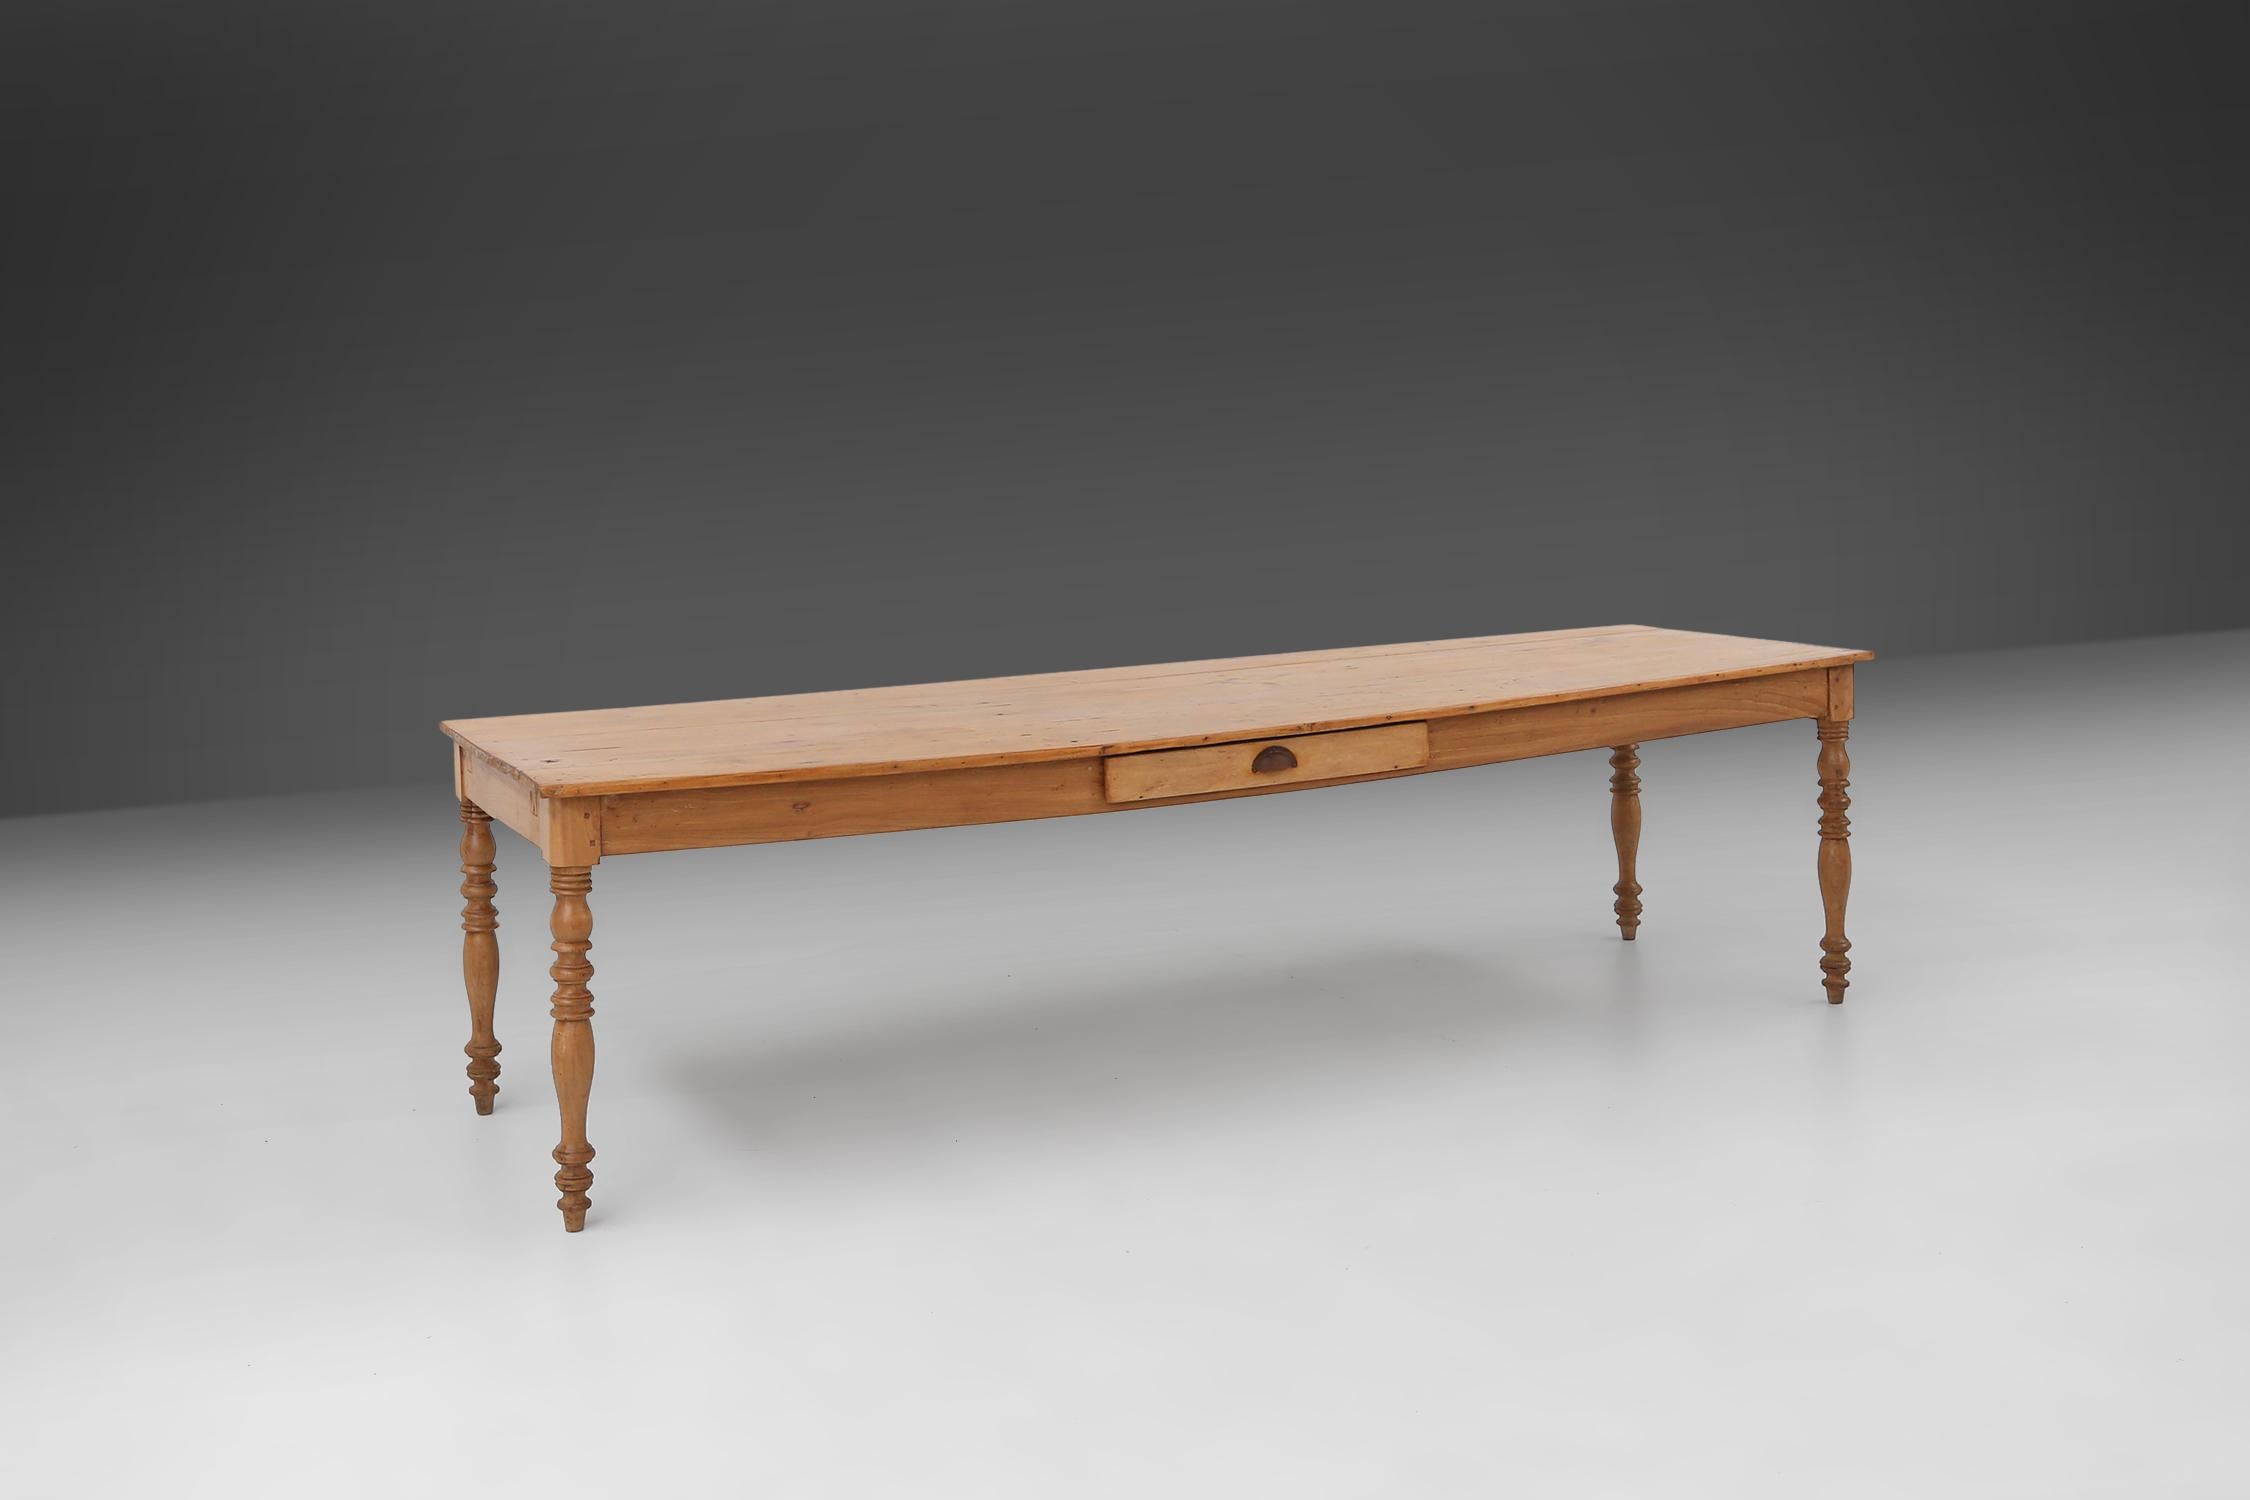 French Large pine wood farm table with drawer and turned legs, France, 1850s